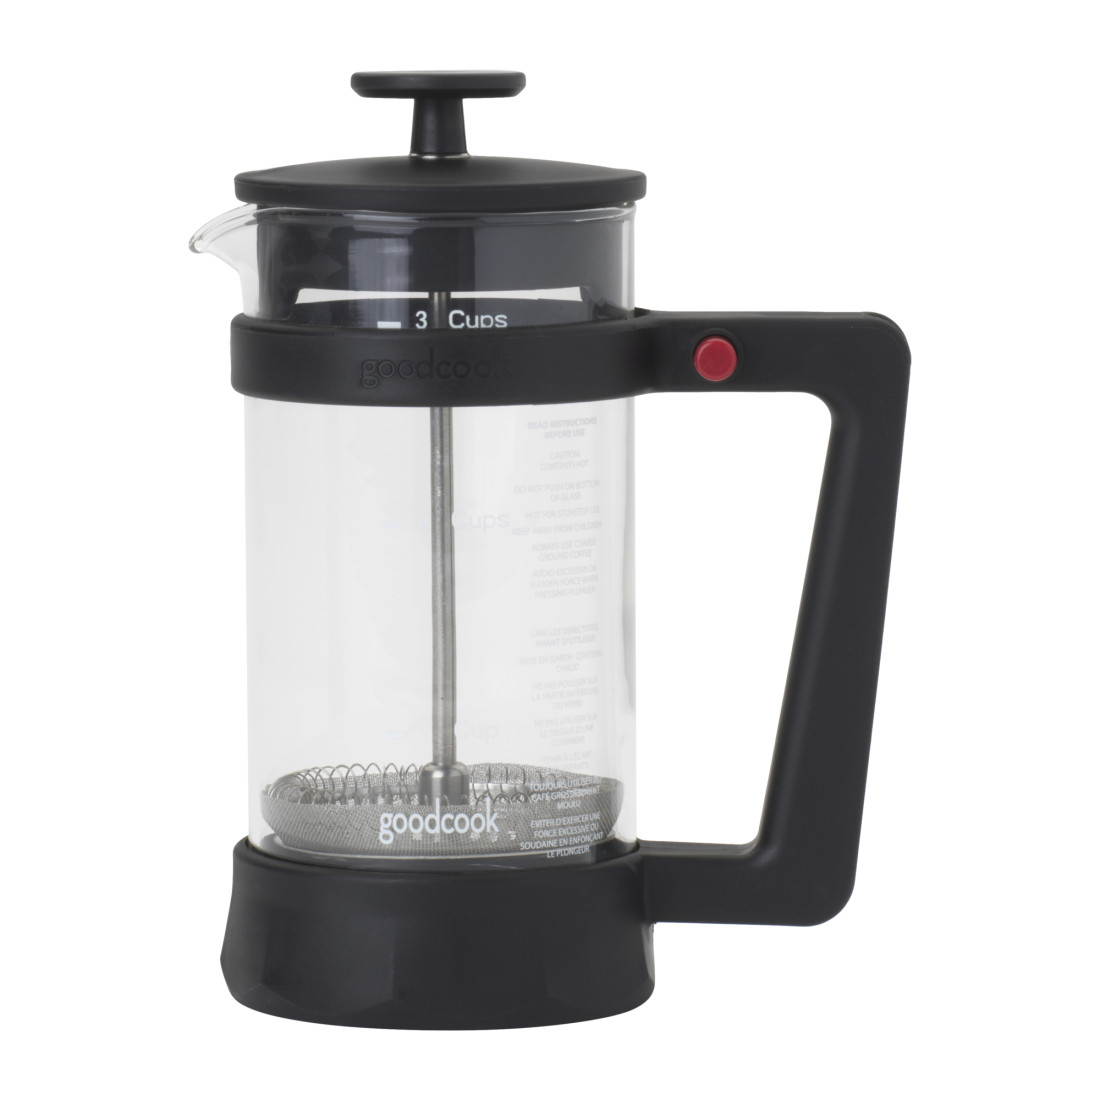 GoodCook Koffē 3 cup Plastic Frame Coffee Press black, with heat resistant  glass removable carafe - GoodCook